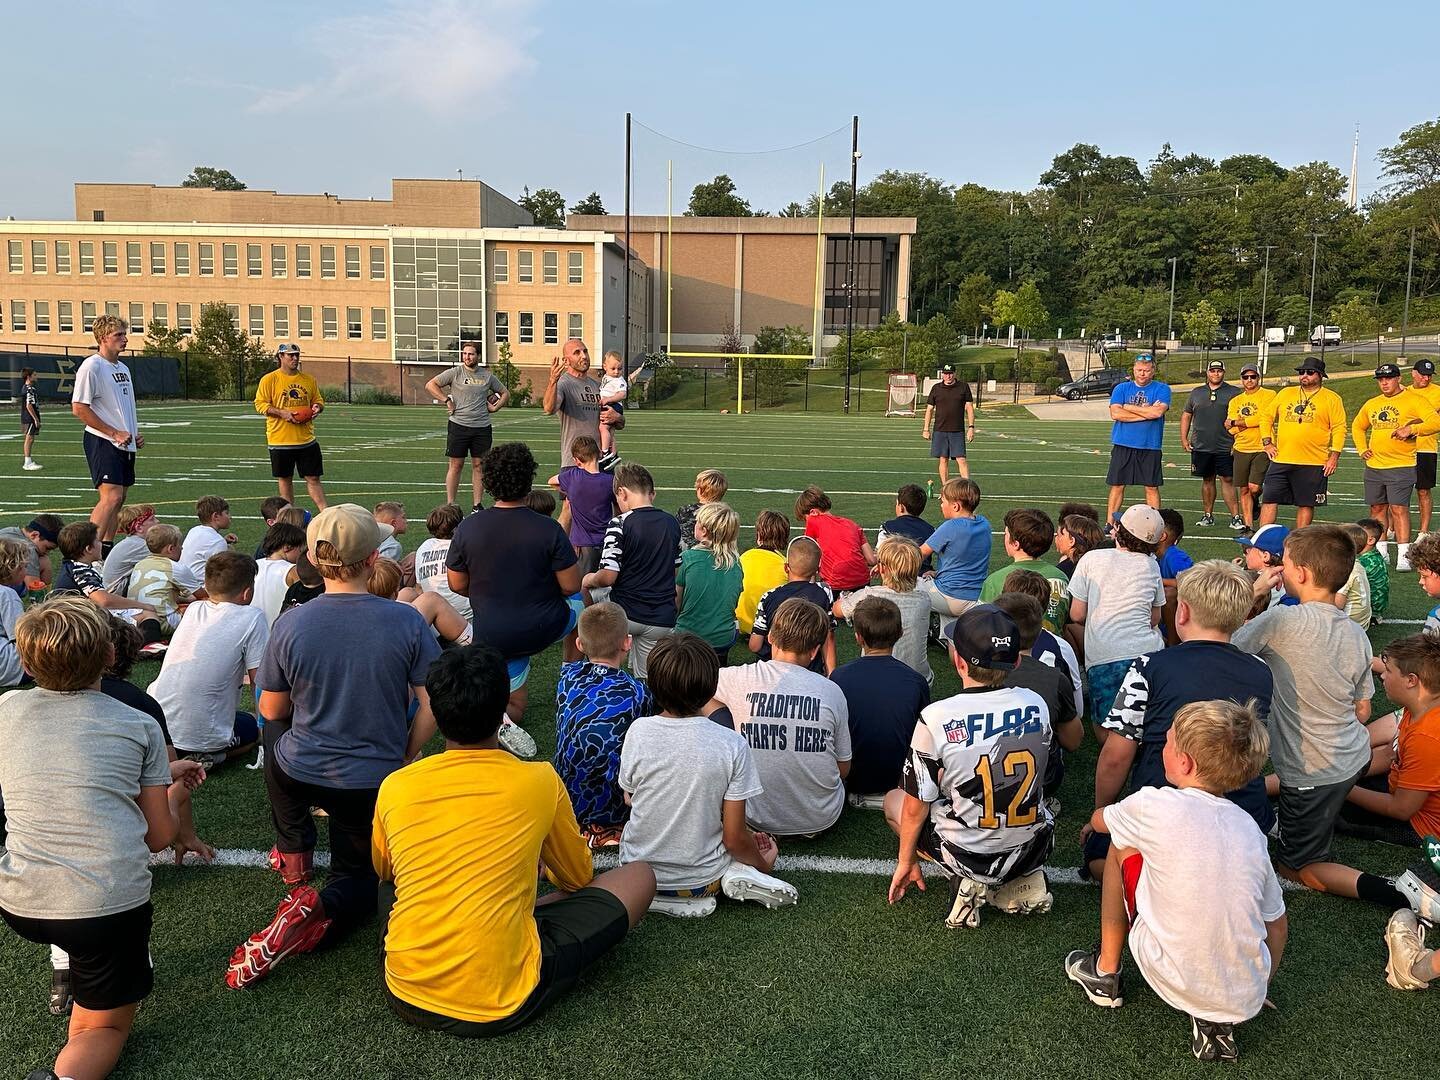 Play Like A Champion Camp Day 1 down and in the books. Coach Collodi stopped down to talk to the kids at the end of practice.

#LetsGoLebo #LeboYouthFootball #LeboFootball